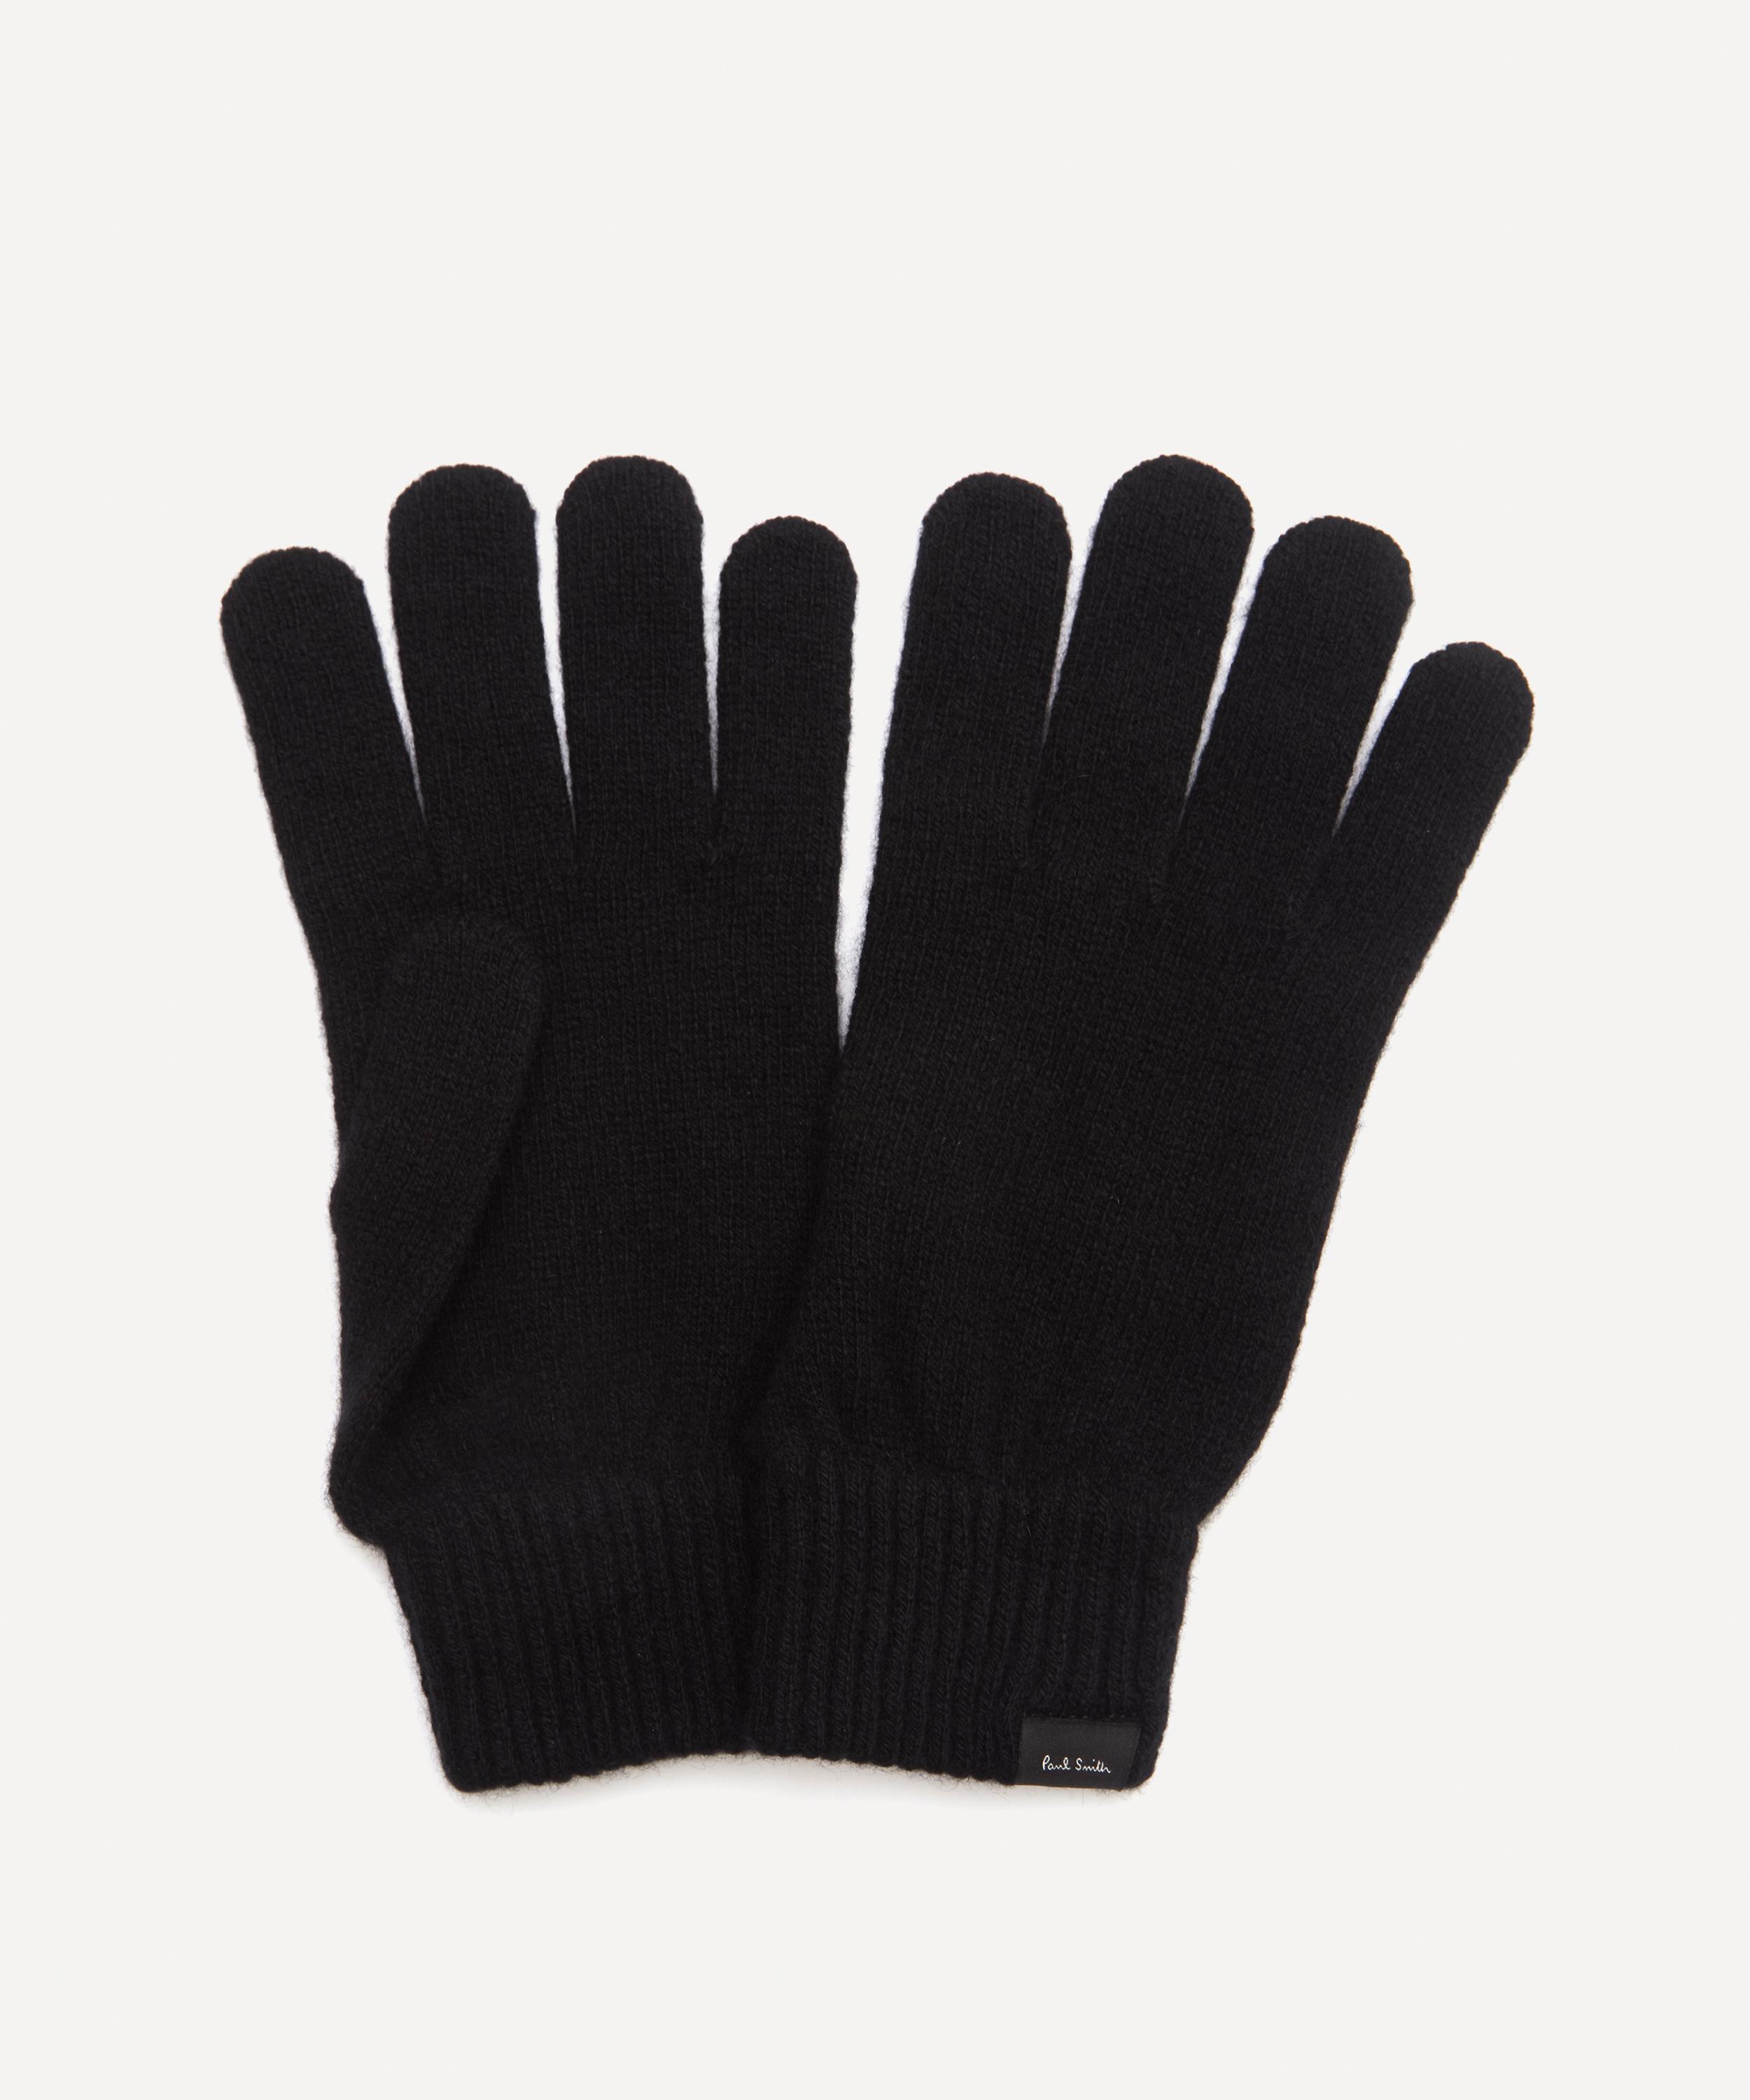 PAUL SMITH KNITTED CASHMERE-BLEND GLOVES,000709650